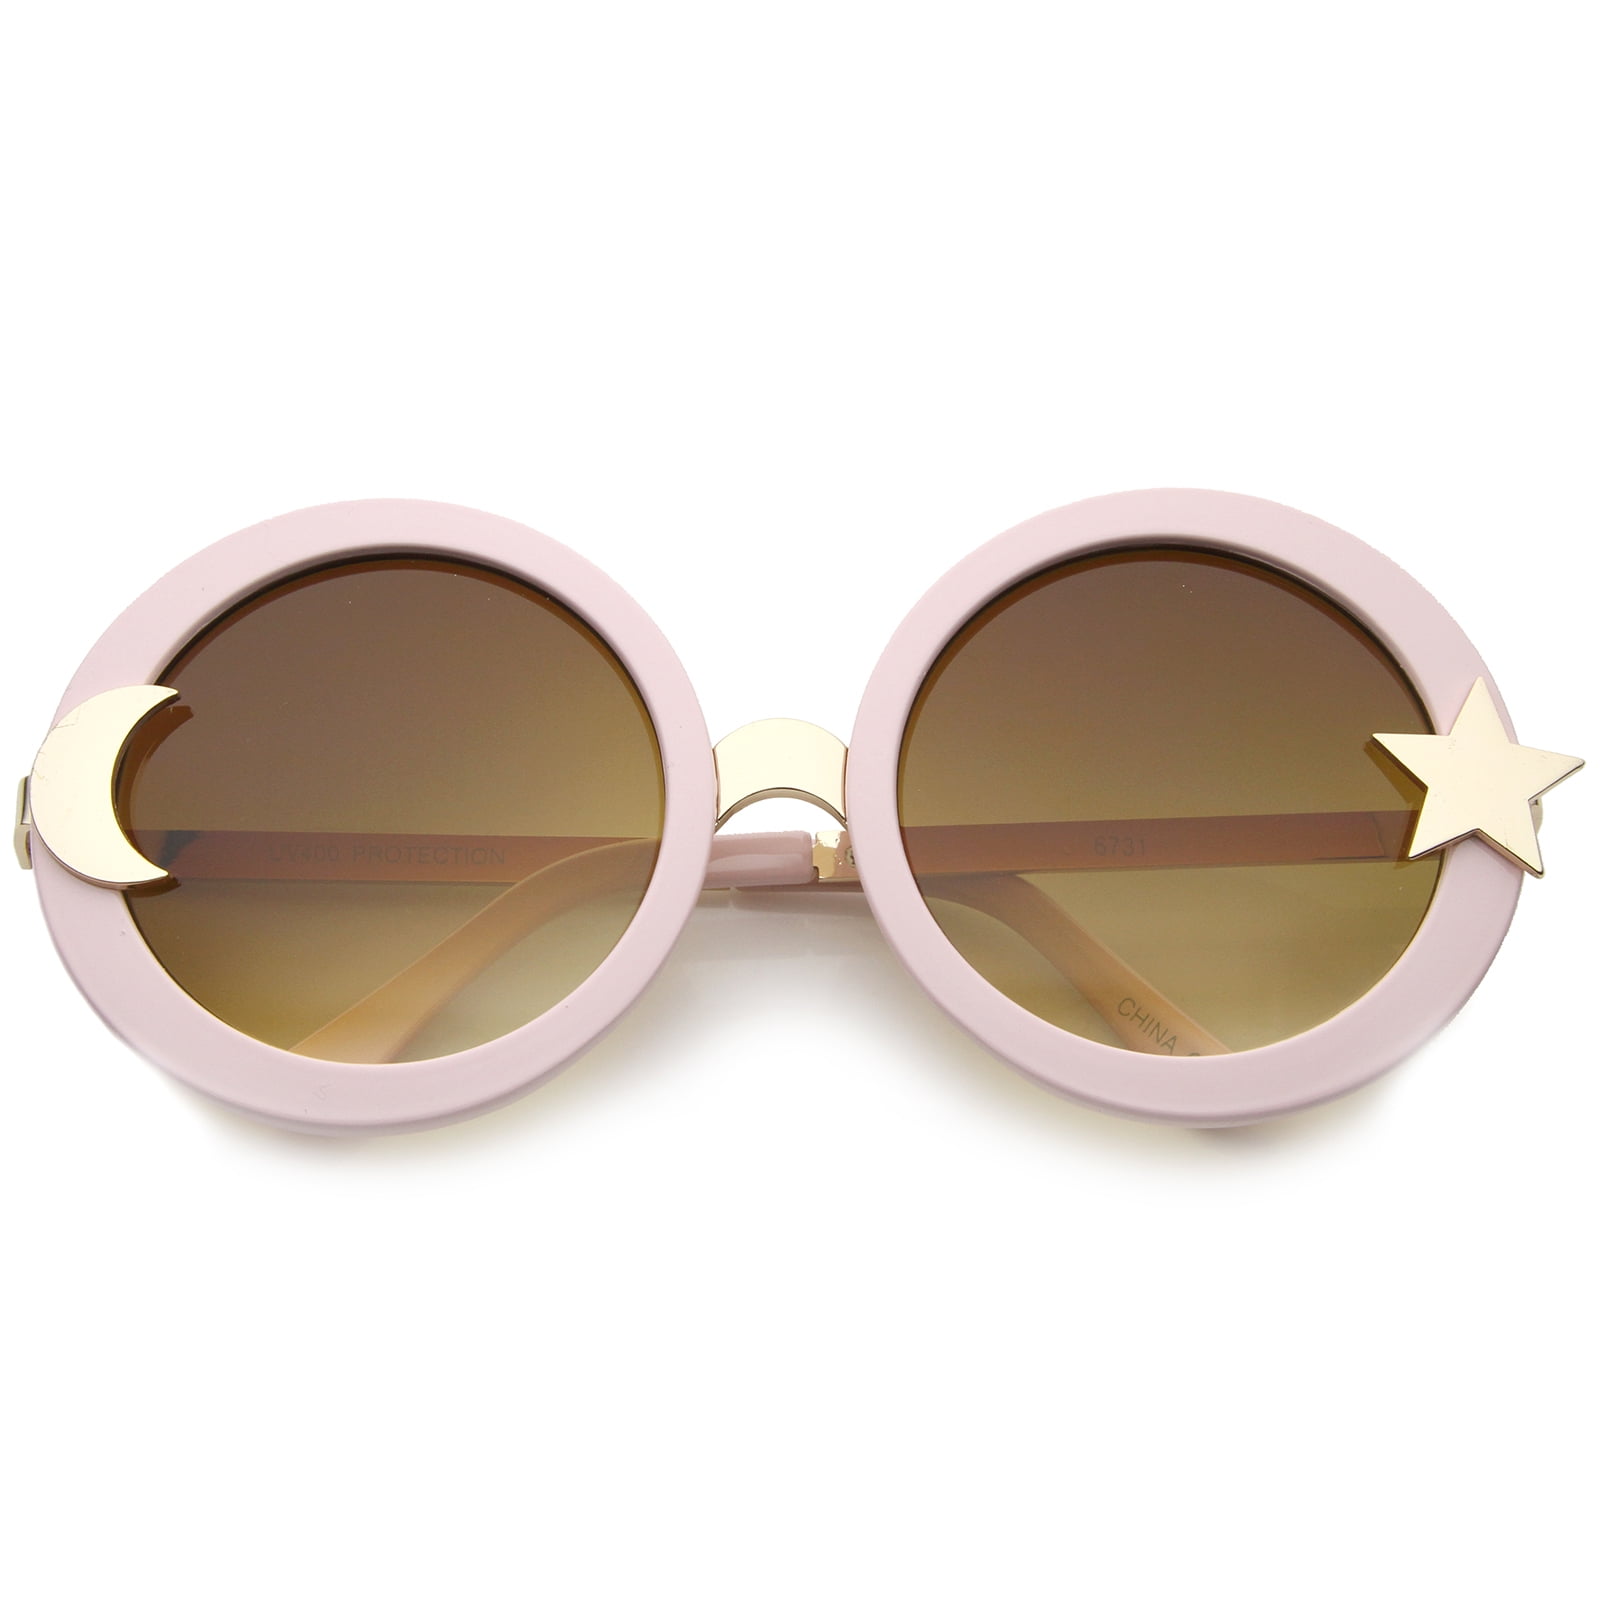 Strawberry Moon Square Pink Acetate & Gold-Plated Steel Sunglasses